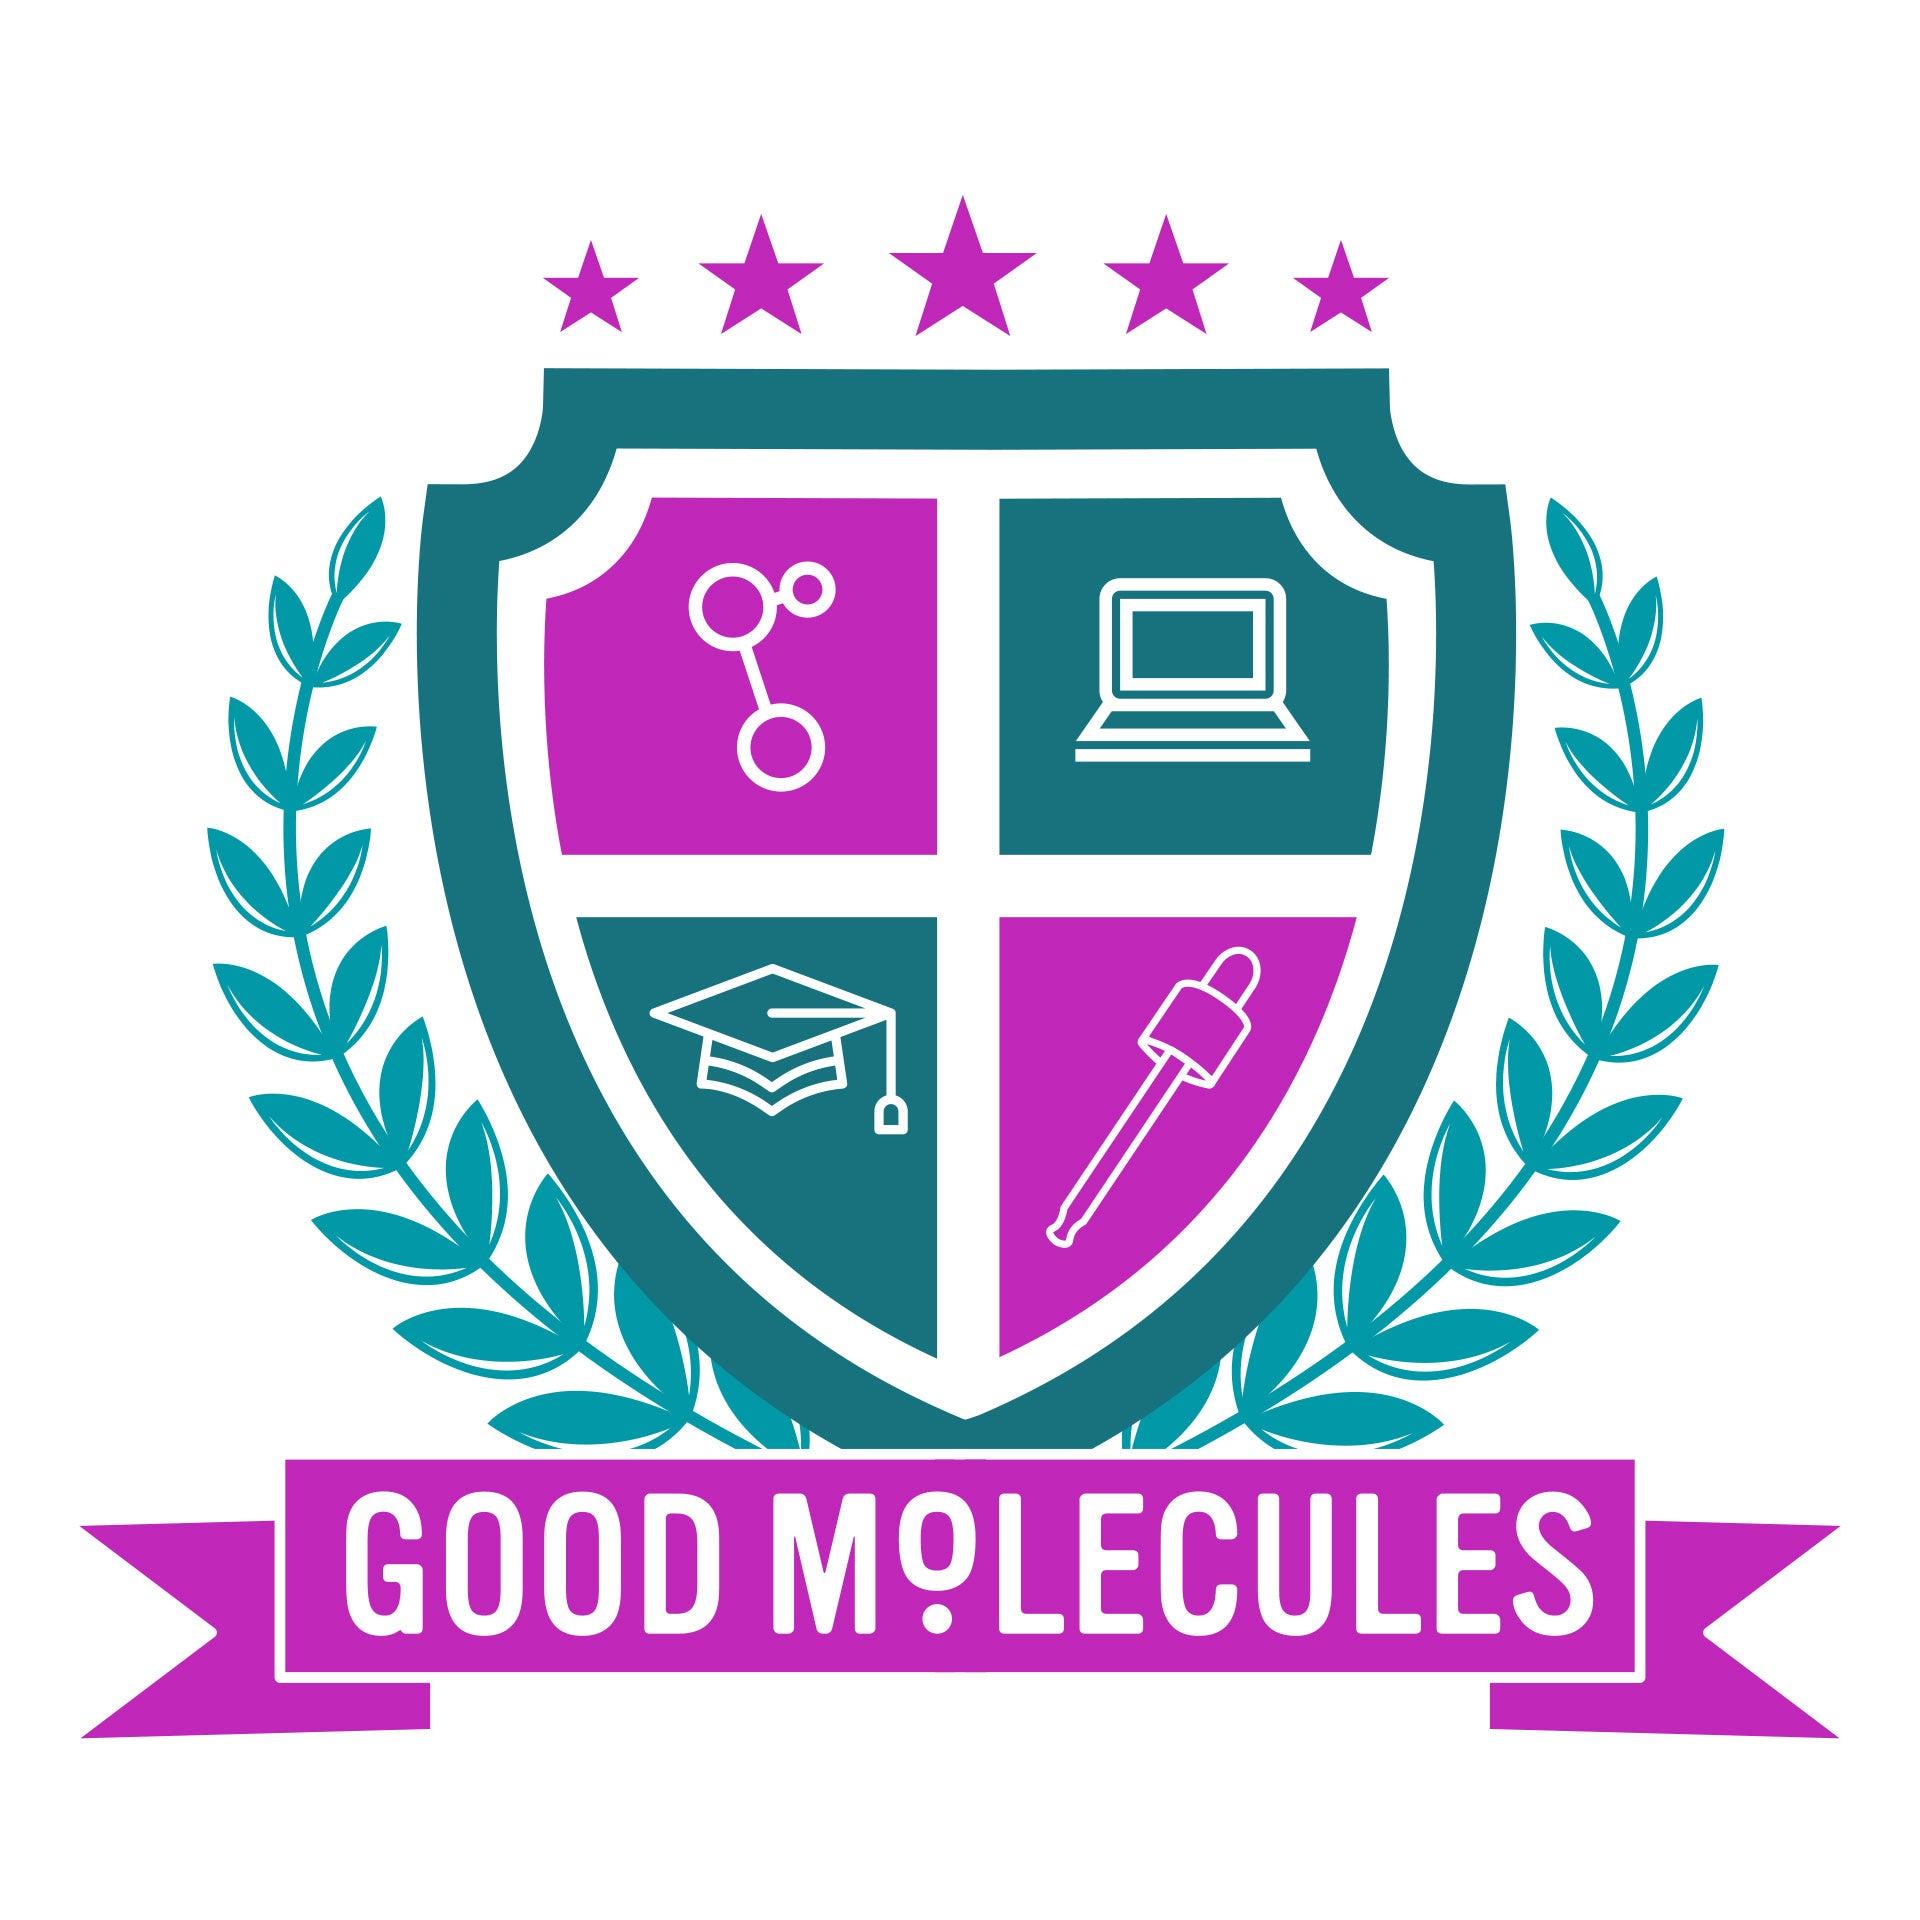 Good Molecules is coming to Ohio State University!